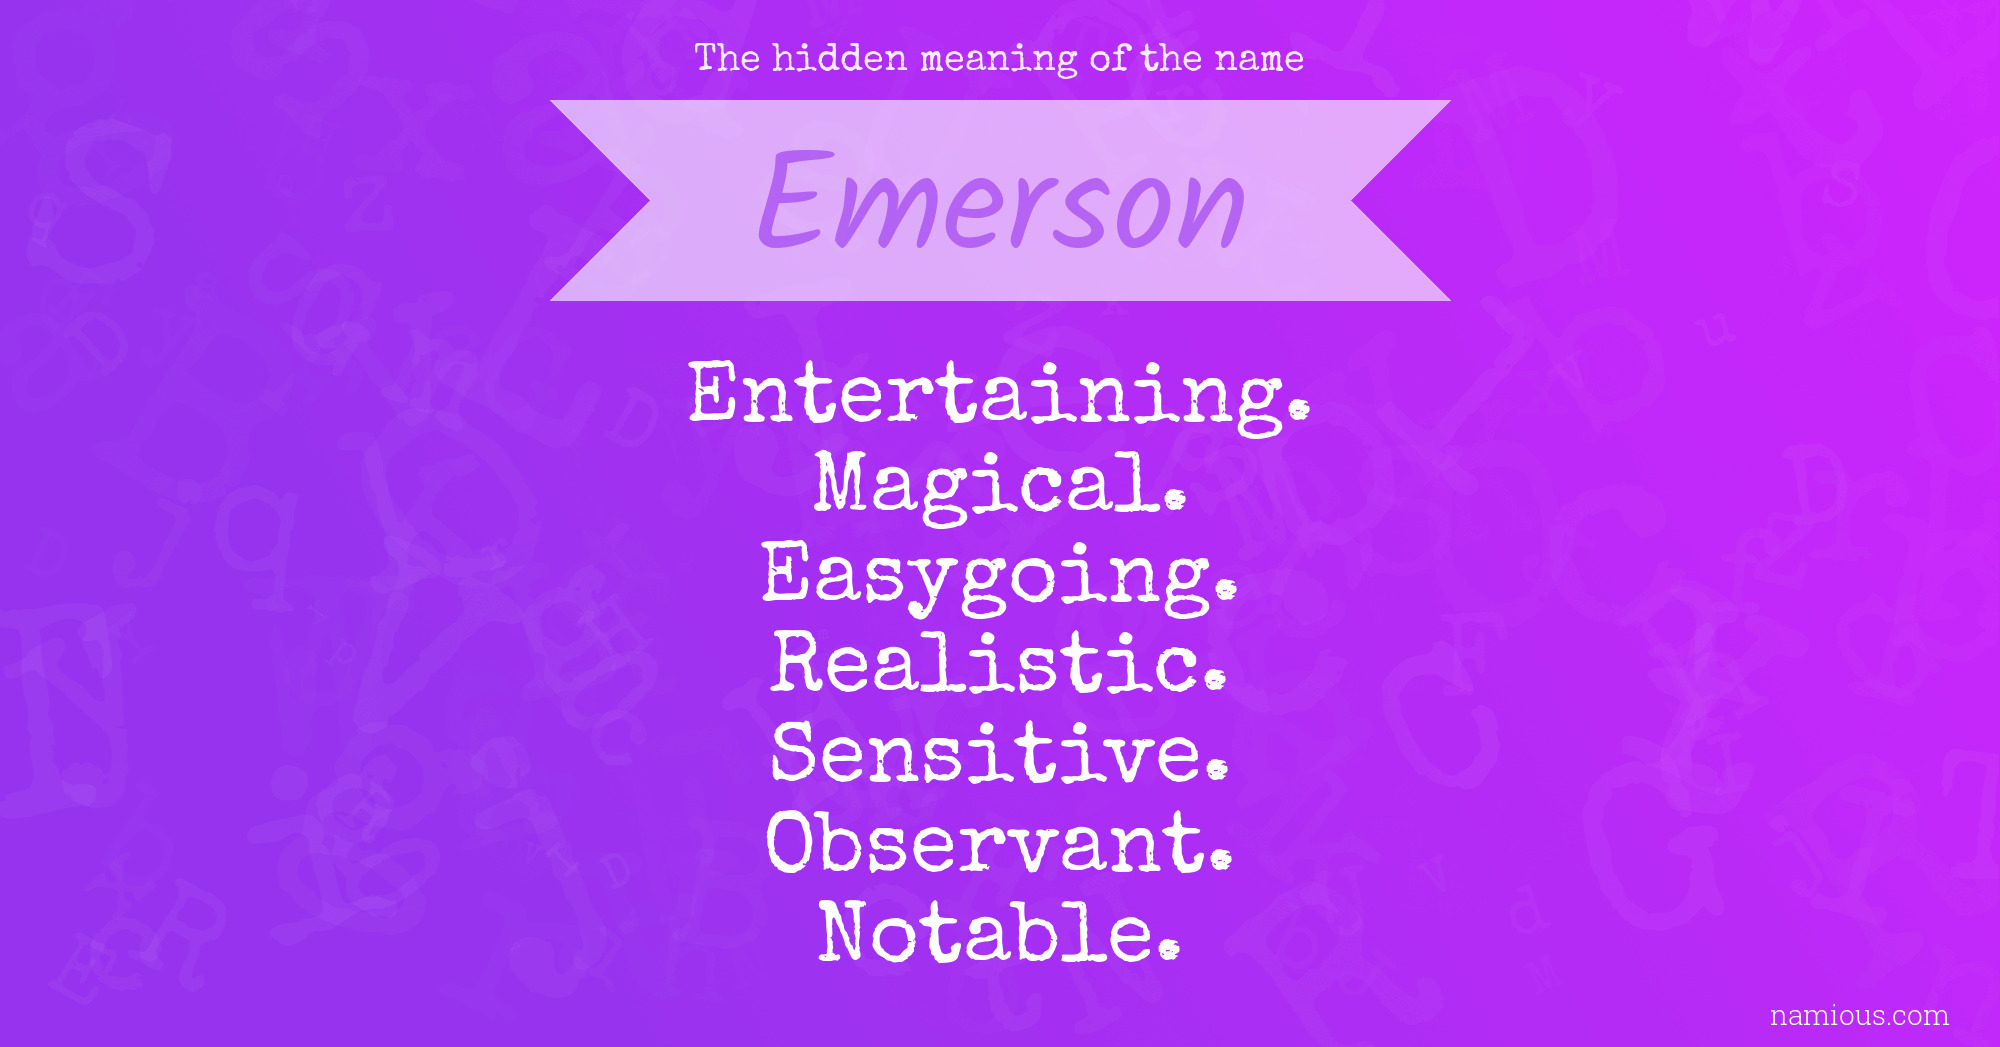 The hidden meaning of the name Emerson